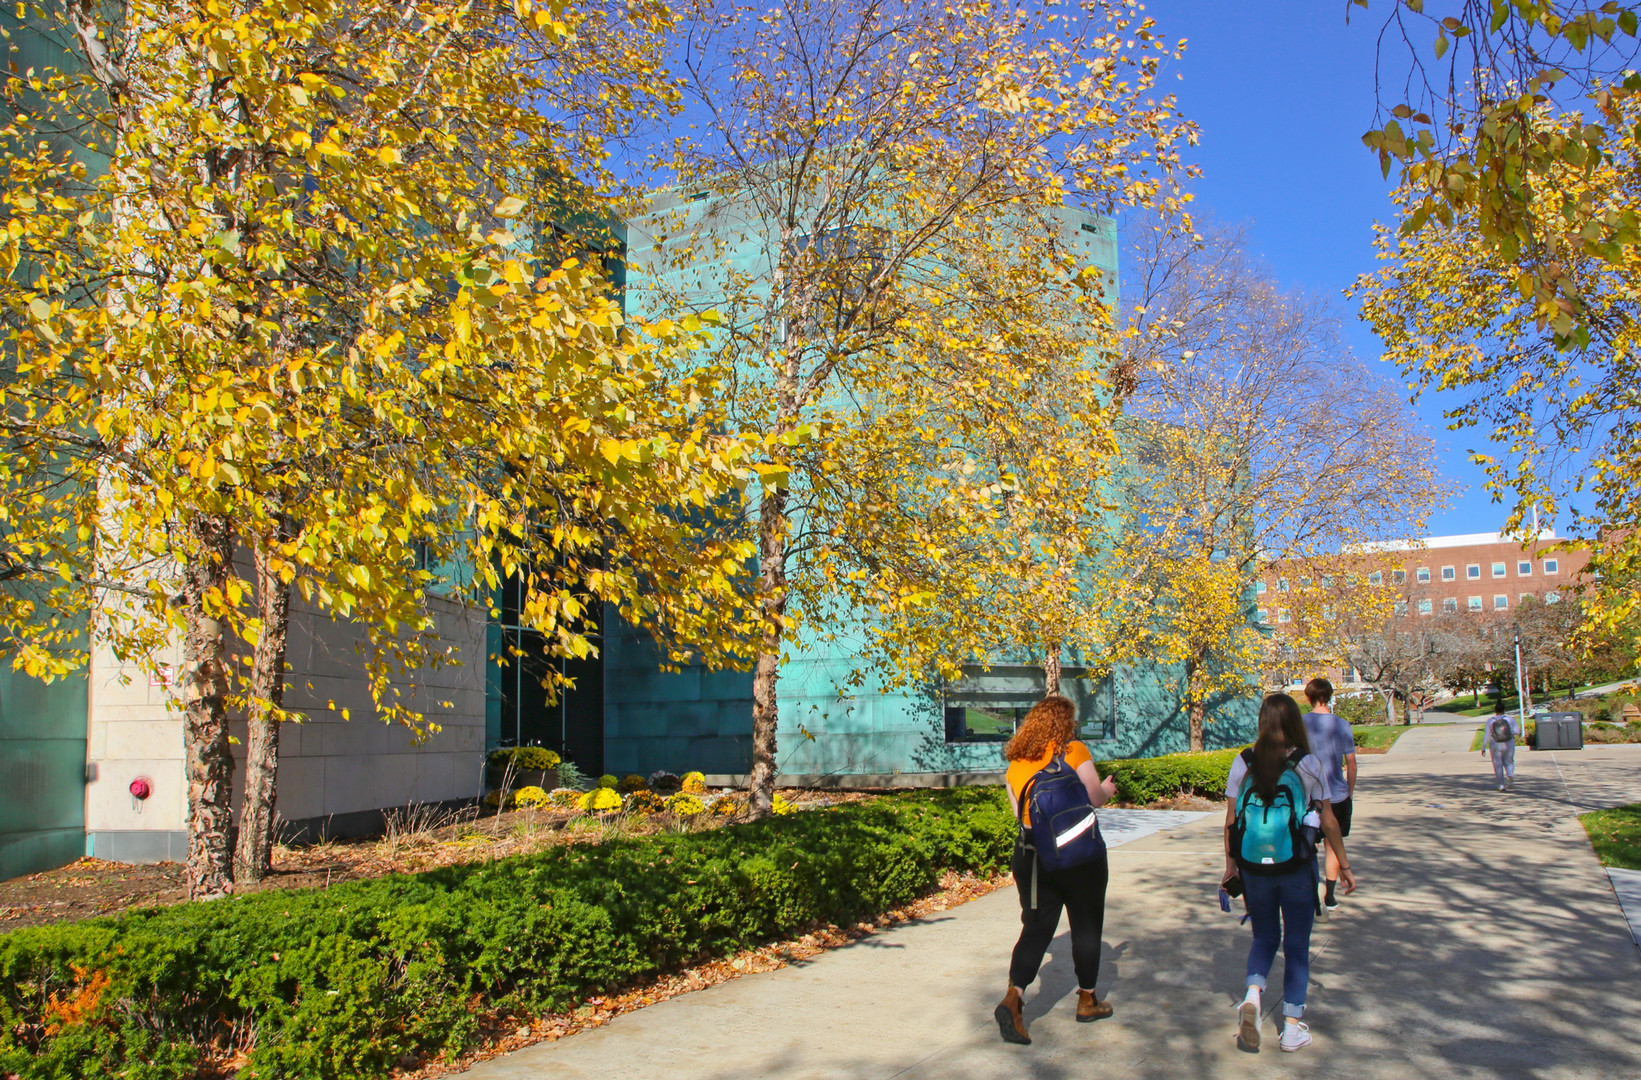 Students walk by the Shapiro campus center, with fall foliage around them.